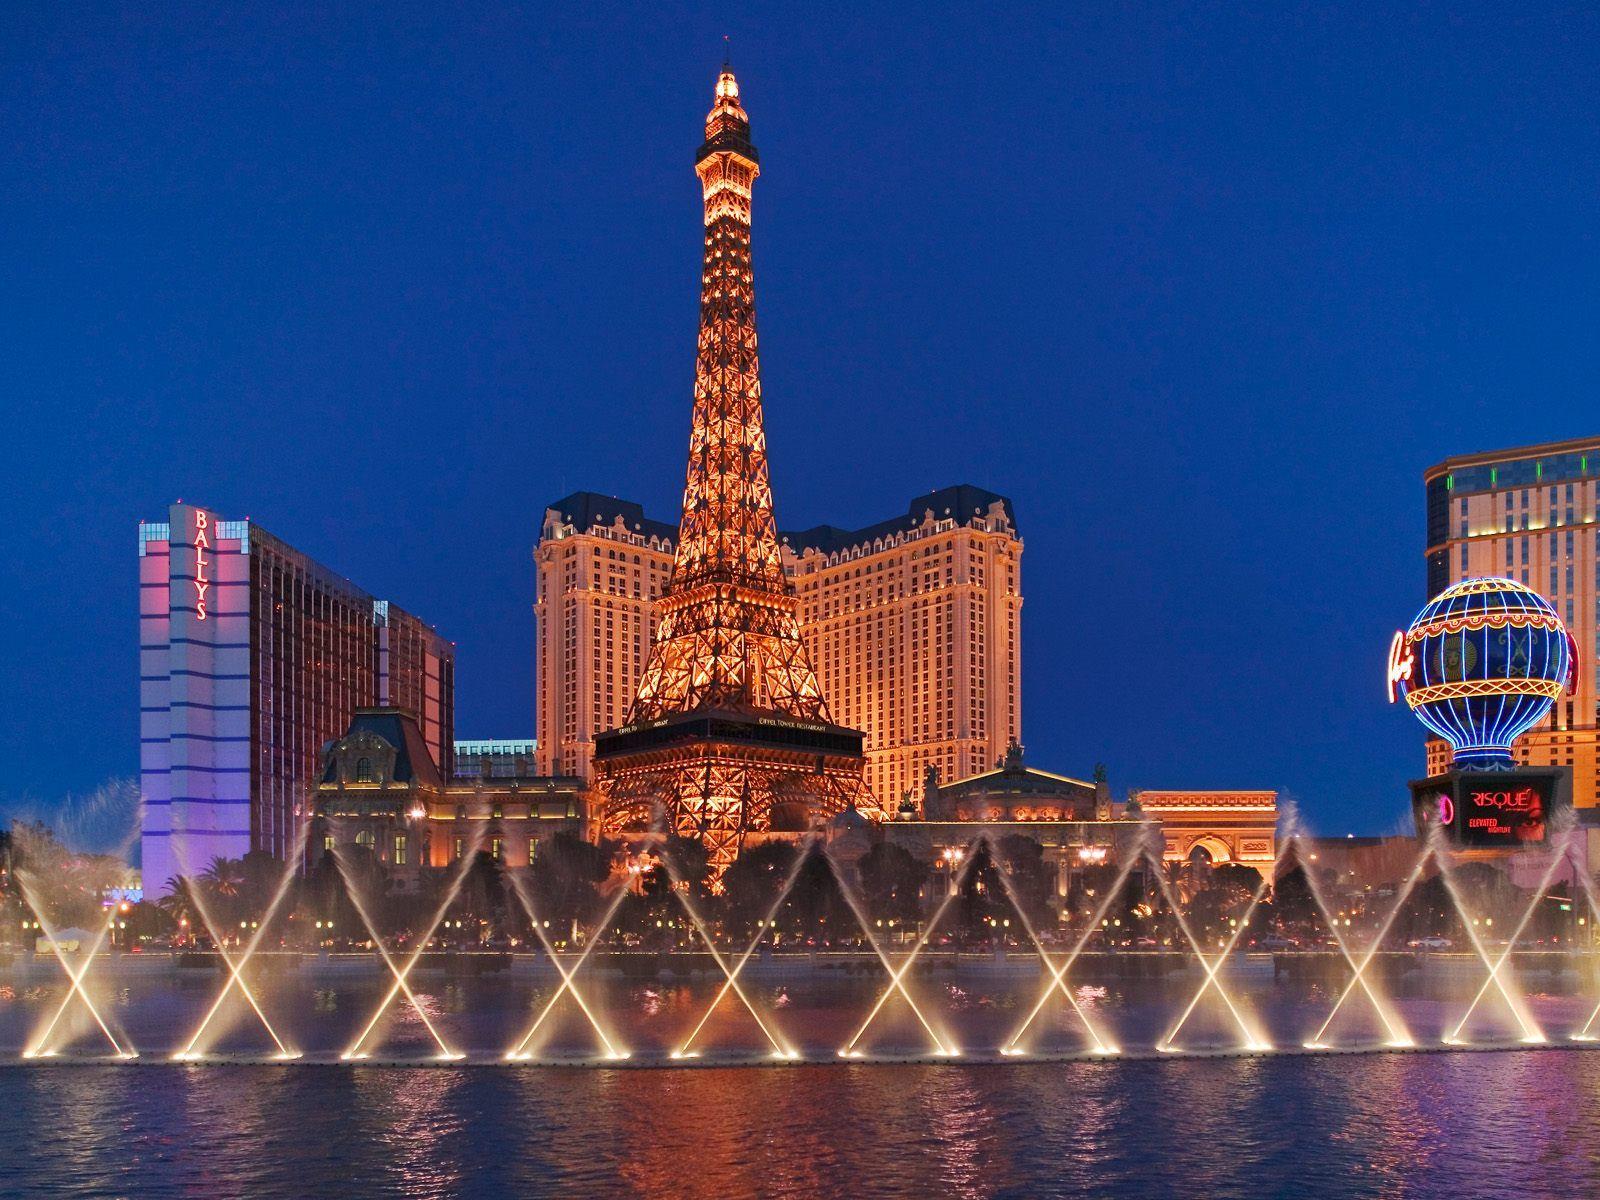 The Bellagio Fountains with the Eiffel Tower at night - Las Vegas